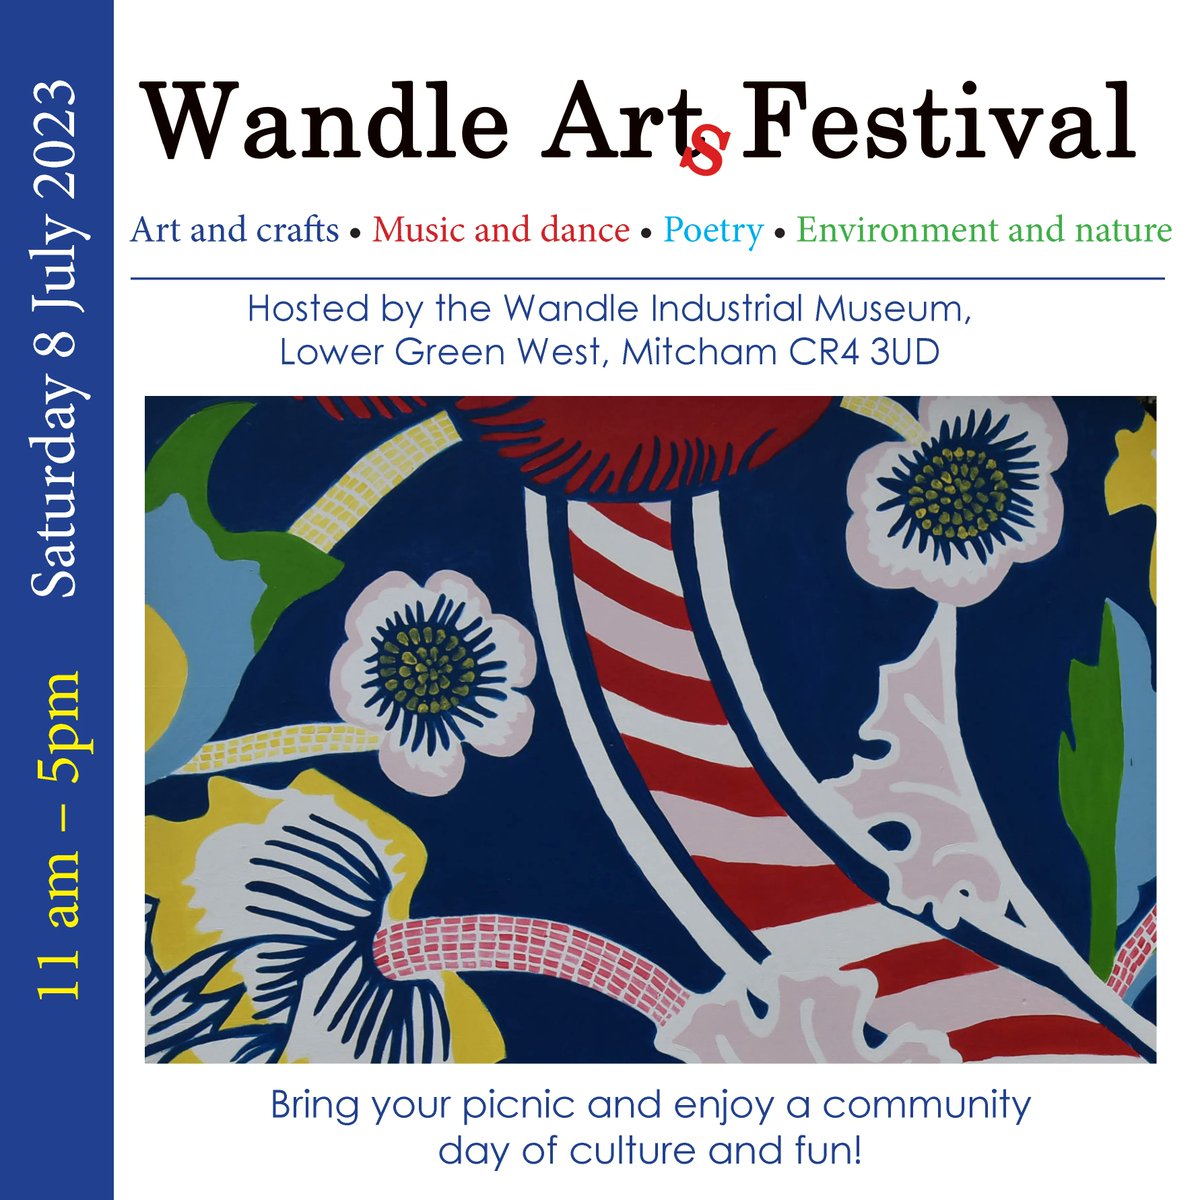 Are you ready? The Wandle Arts Festival is taking place on Saturday 8th July on the Lower Green West, Mitcham 11-5. Art, music, community stalls and more. As now hopefully it will be dry and sun. Put the date in your diary, bring your picnic and join us for a fun relaxing day.